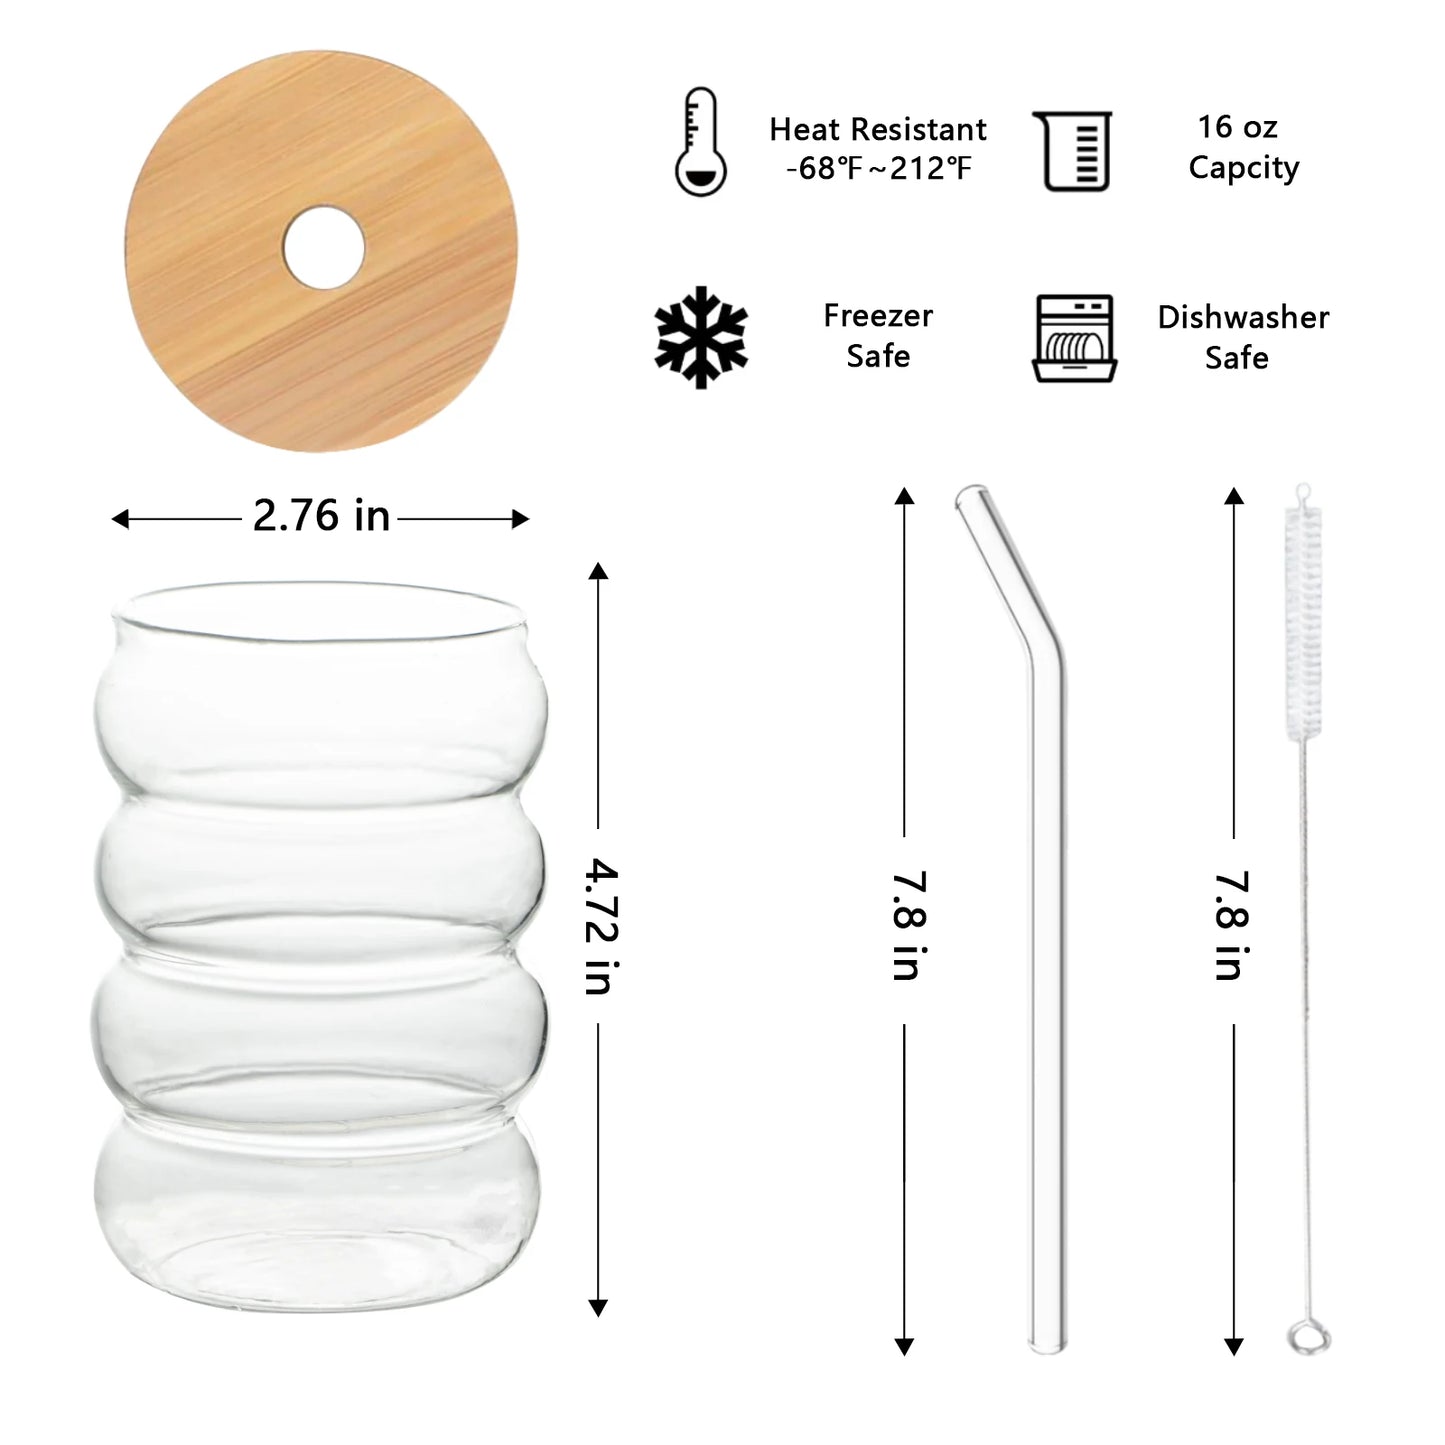 1PCS Creative Glass Cup with Lid Straw Heat-resistant Wave Cup Beer Juice Ice Coffee Cups Cocktail Fruit Bubble Glass Drinkware